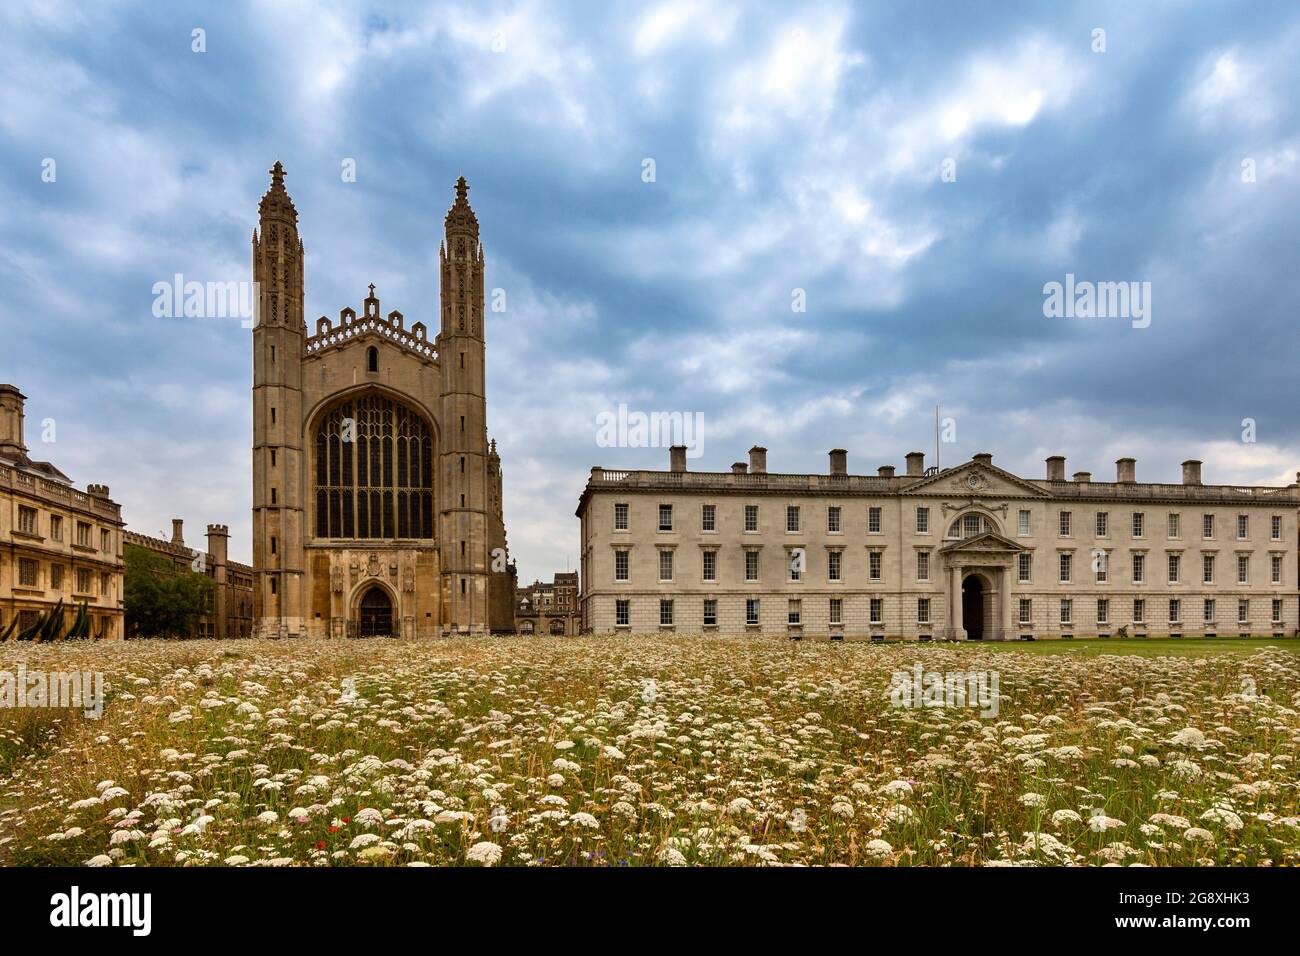 CAMBRIDGE ENGLAND KING'S COLLEGE CHAPEL THE GIBBS  BUILDING WHITE WILD FLOWERS AND RED POPPIES IN SUMMER Stock Photo